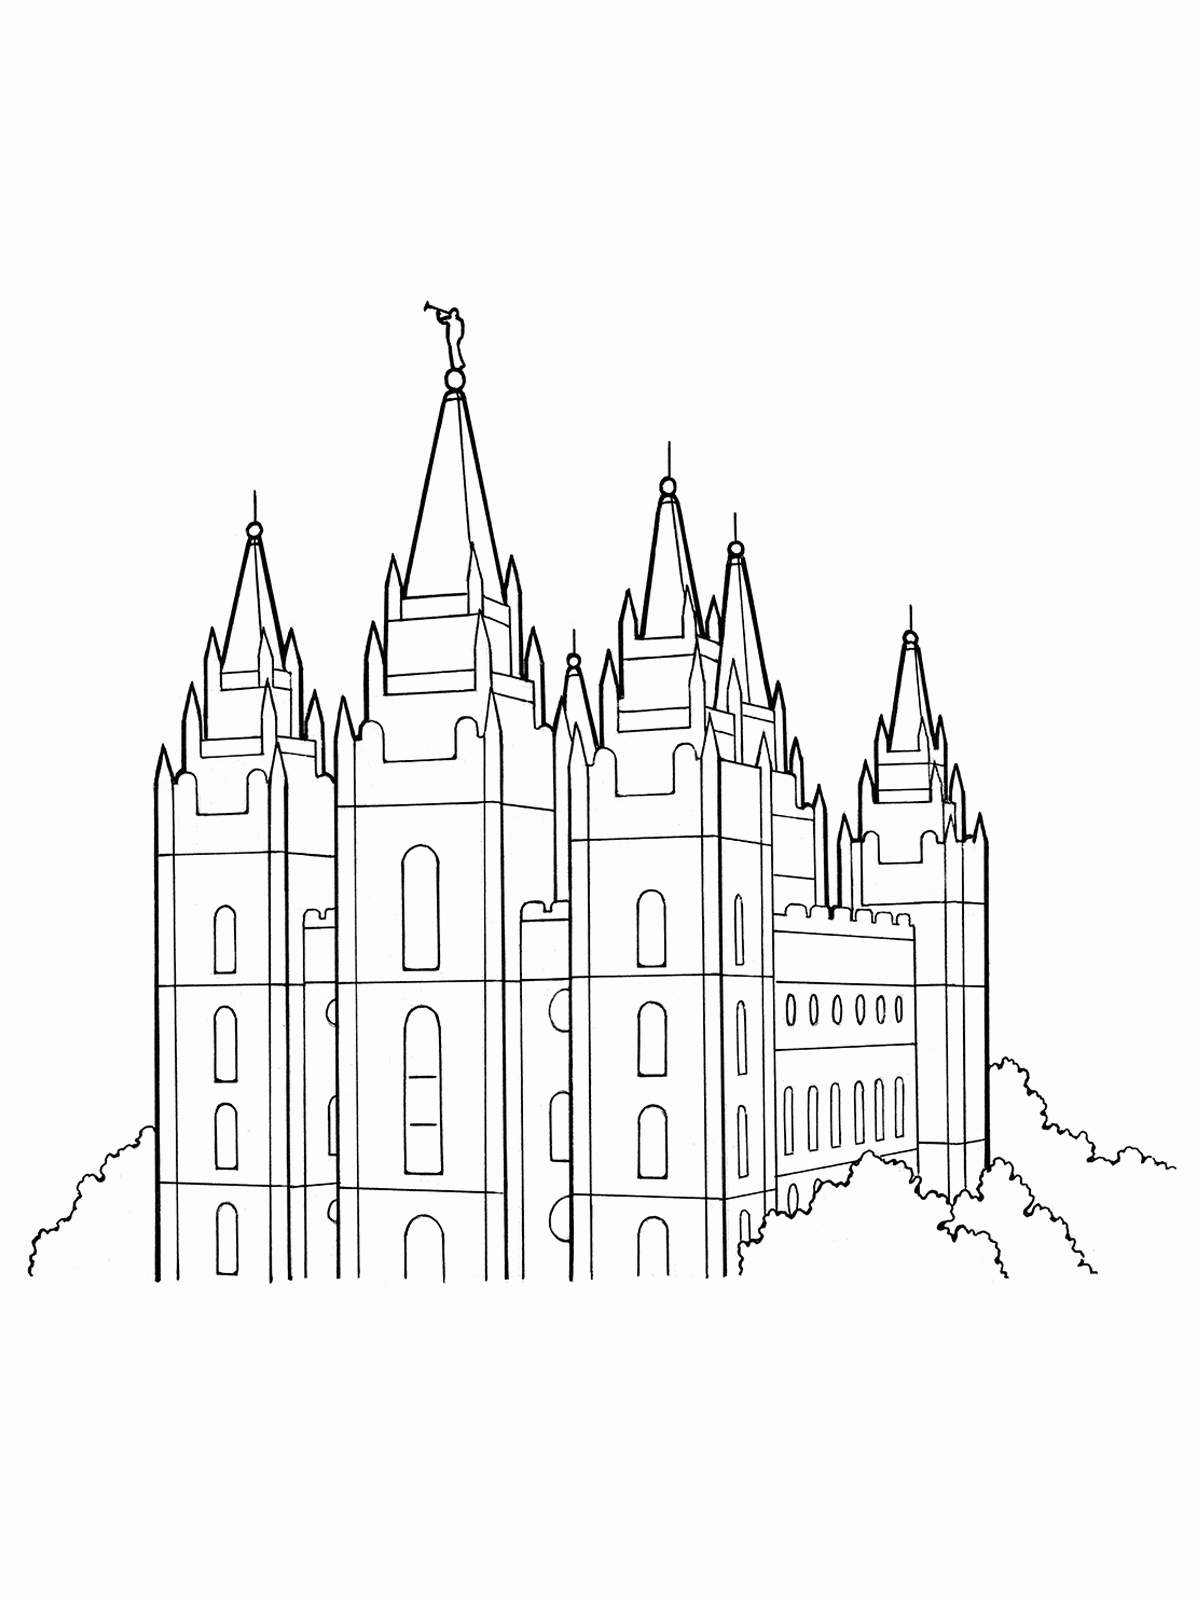 Free Printable Lds Temple Coloring Pages